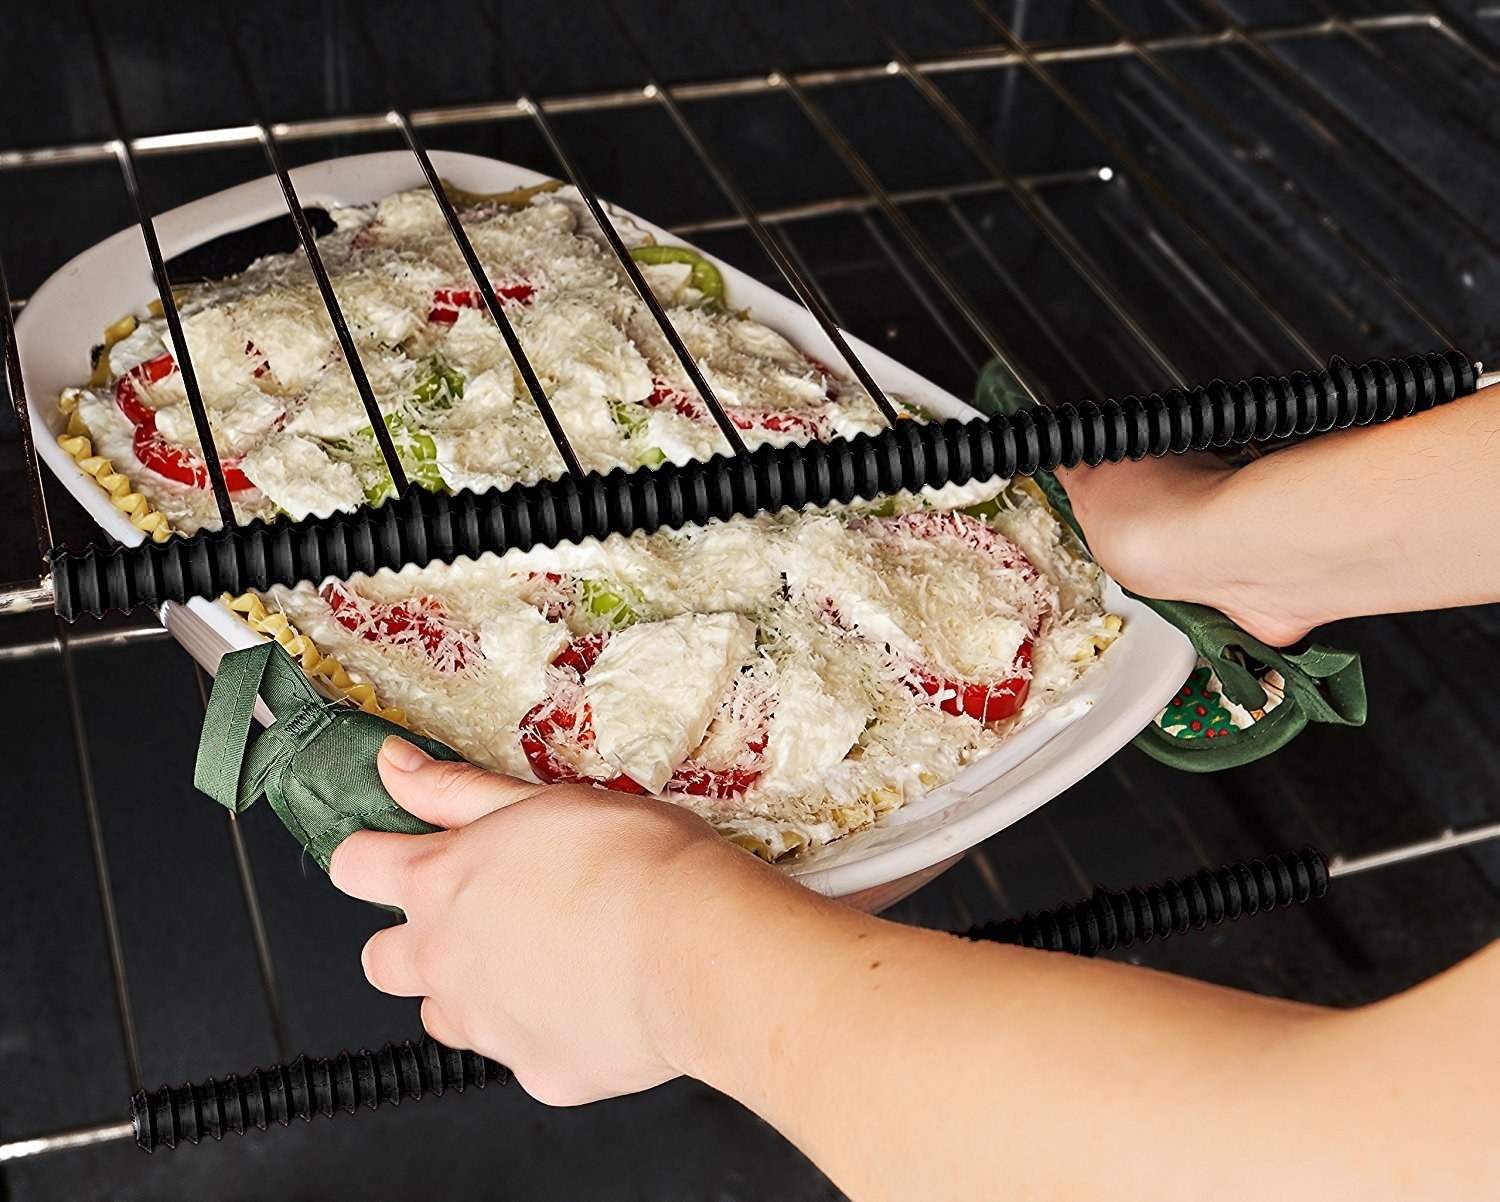 person taking dish out of oven with oven rack shields on oven racks